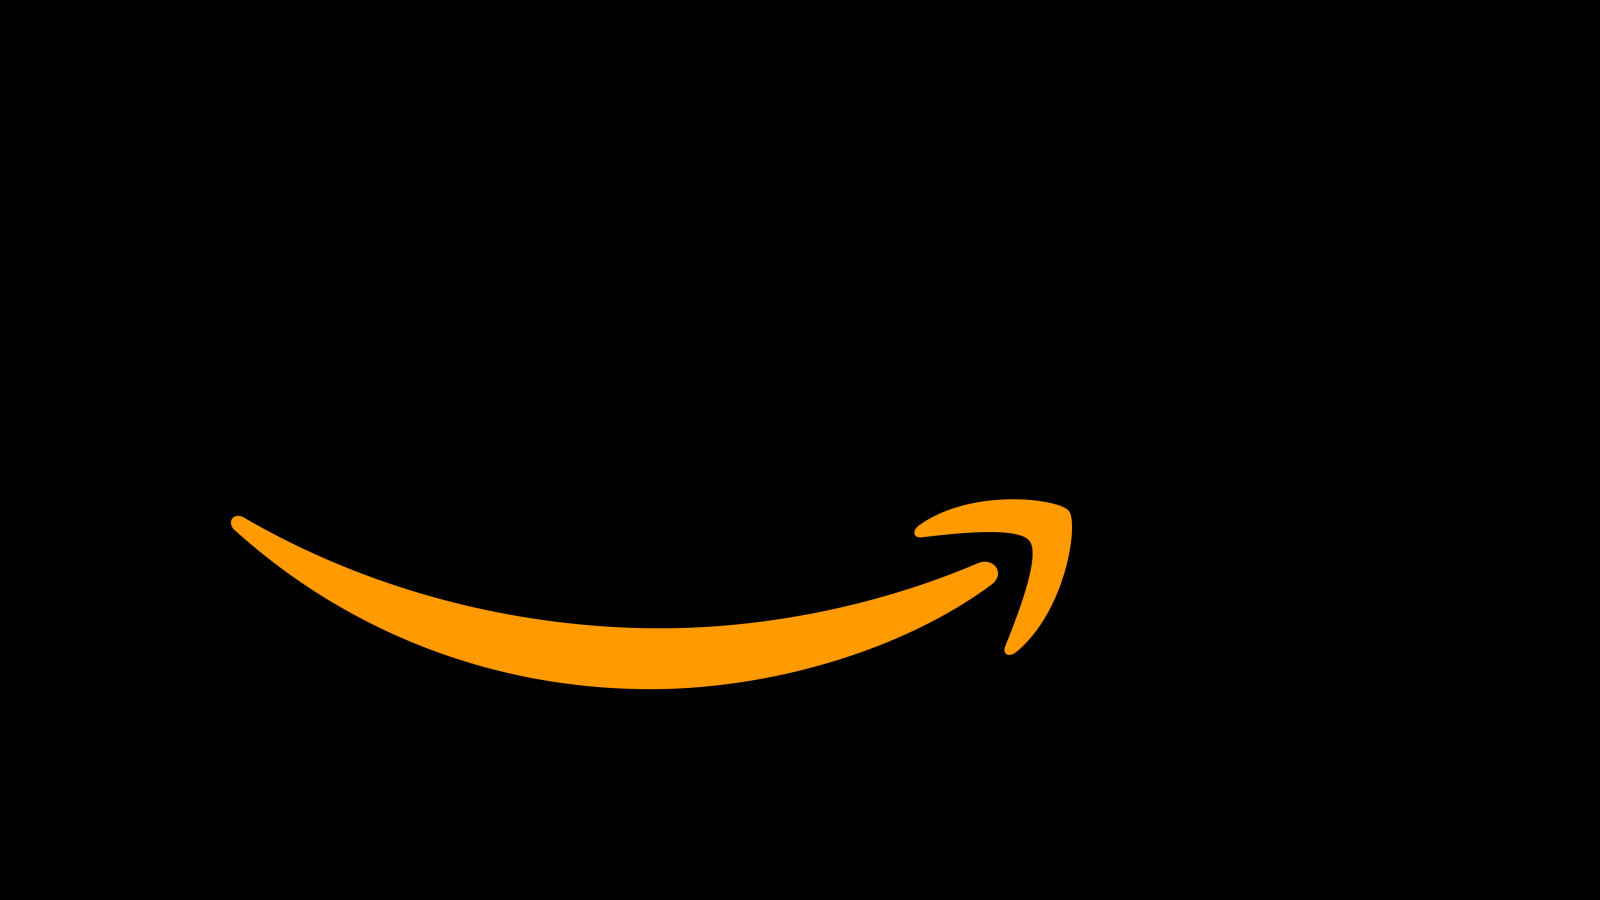 Amazon Logo | The most famous brands and company logos in the world